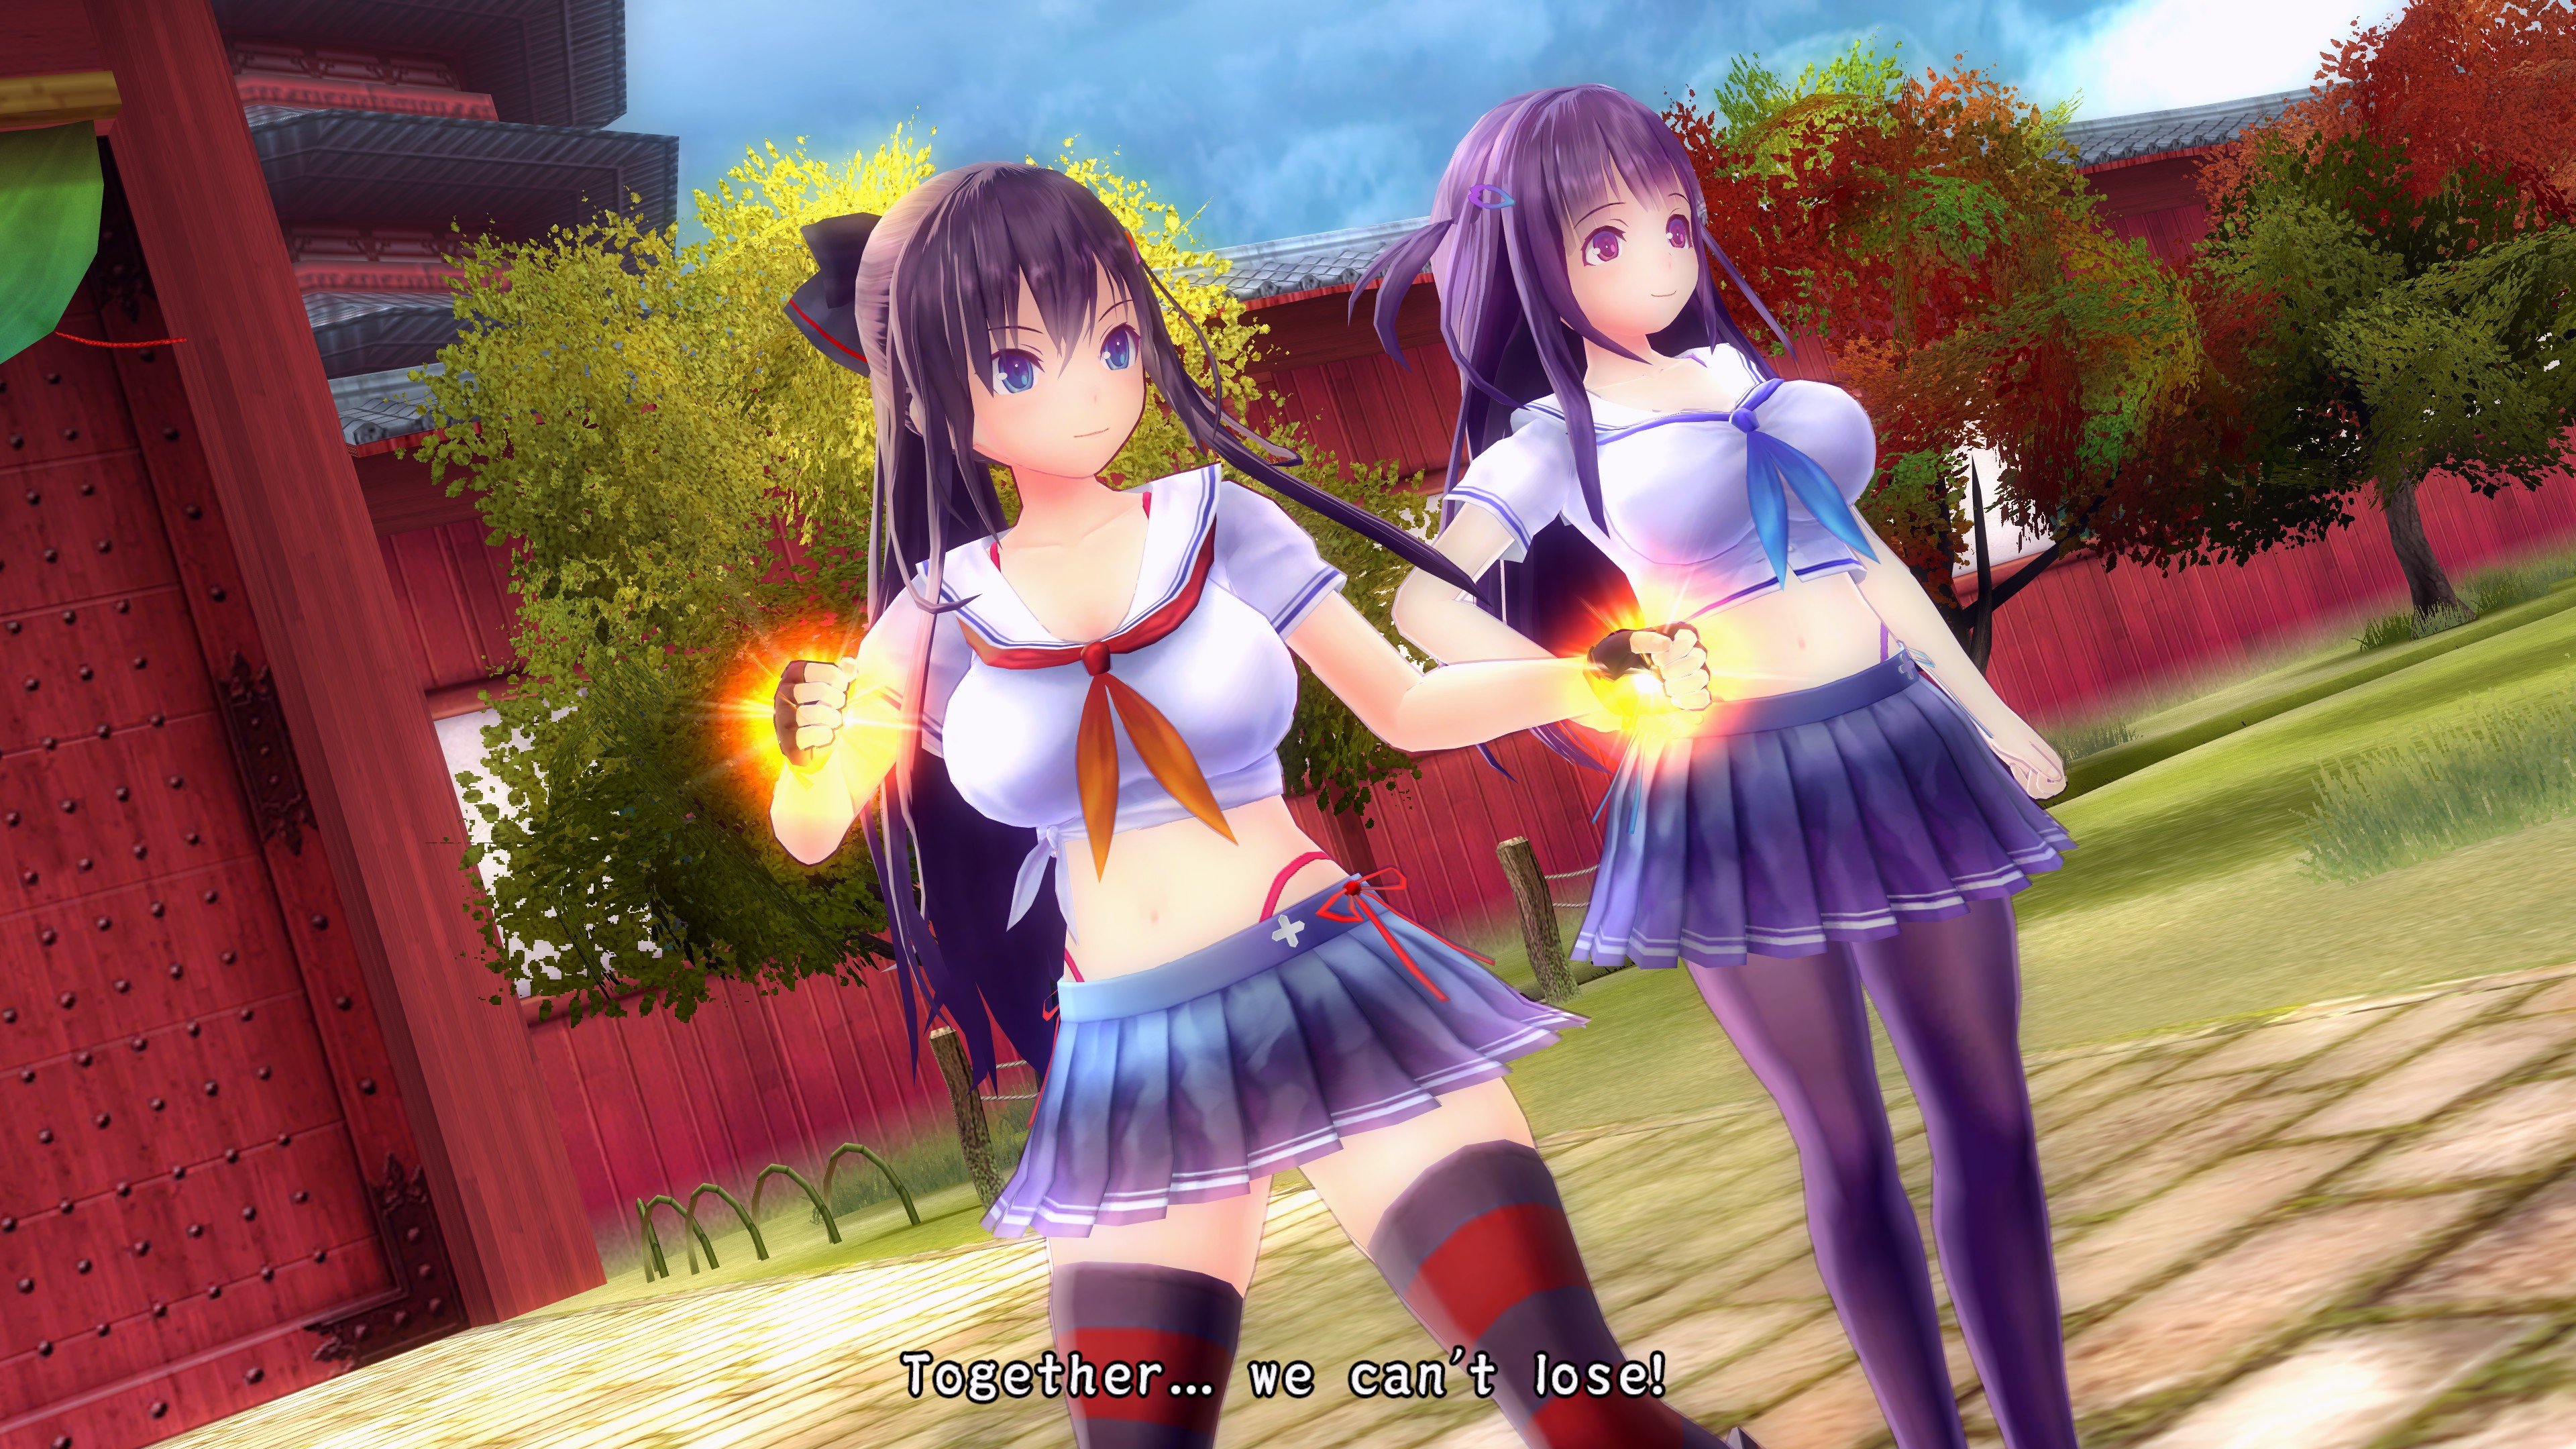 Valkyrie Drive: Bhikkhuni screenshots, images and pictures - Giant Bomb